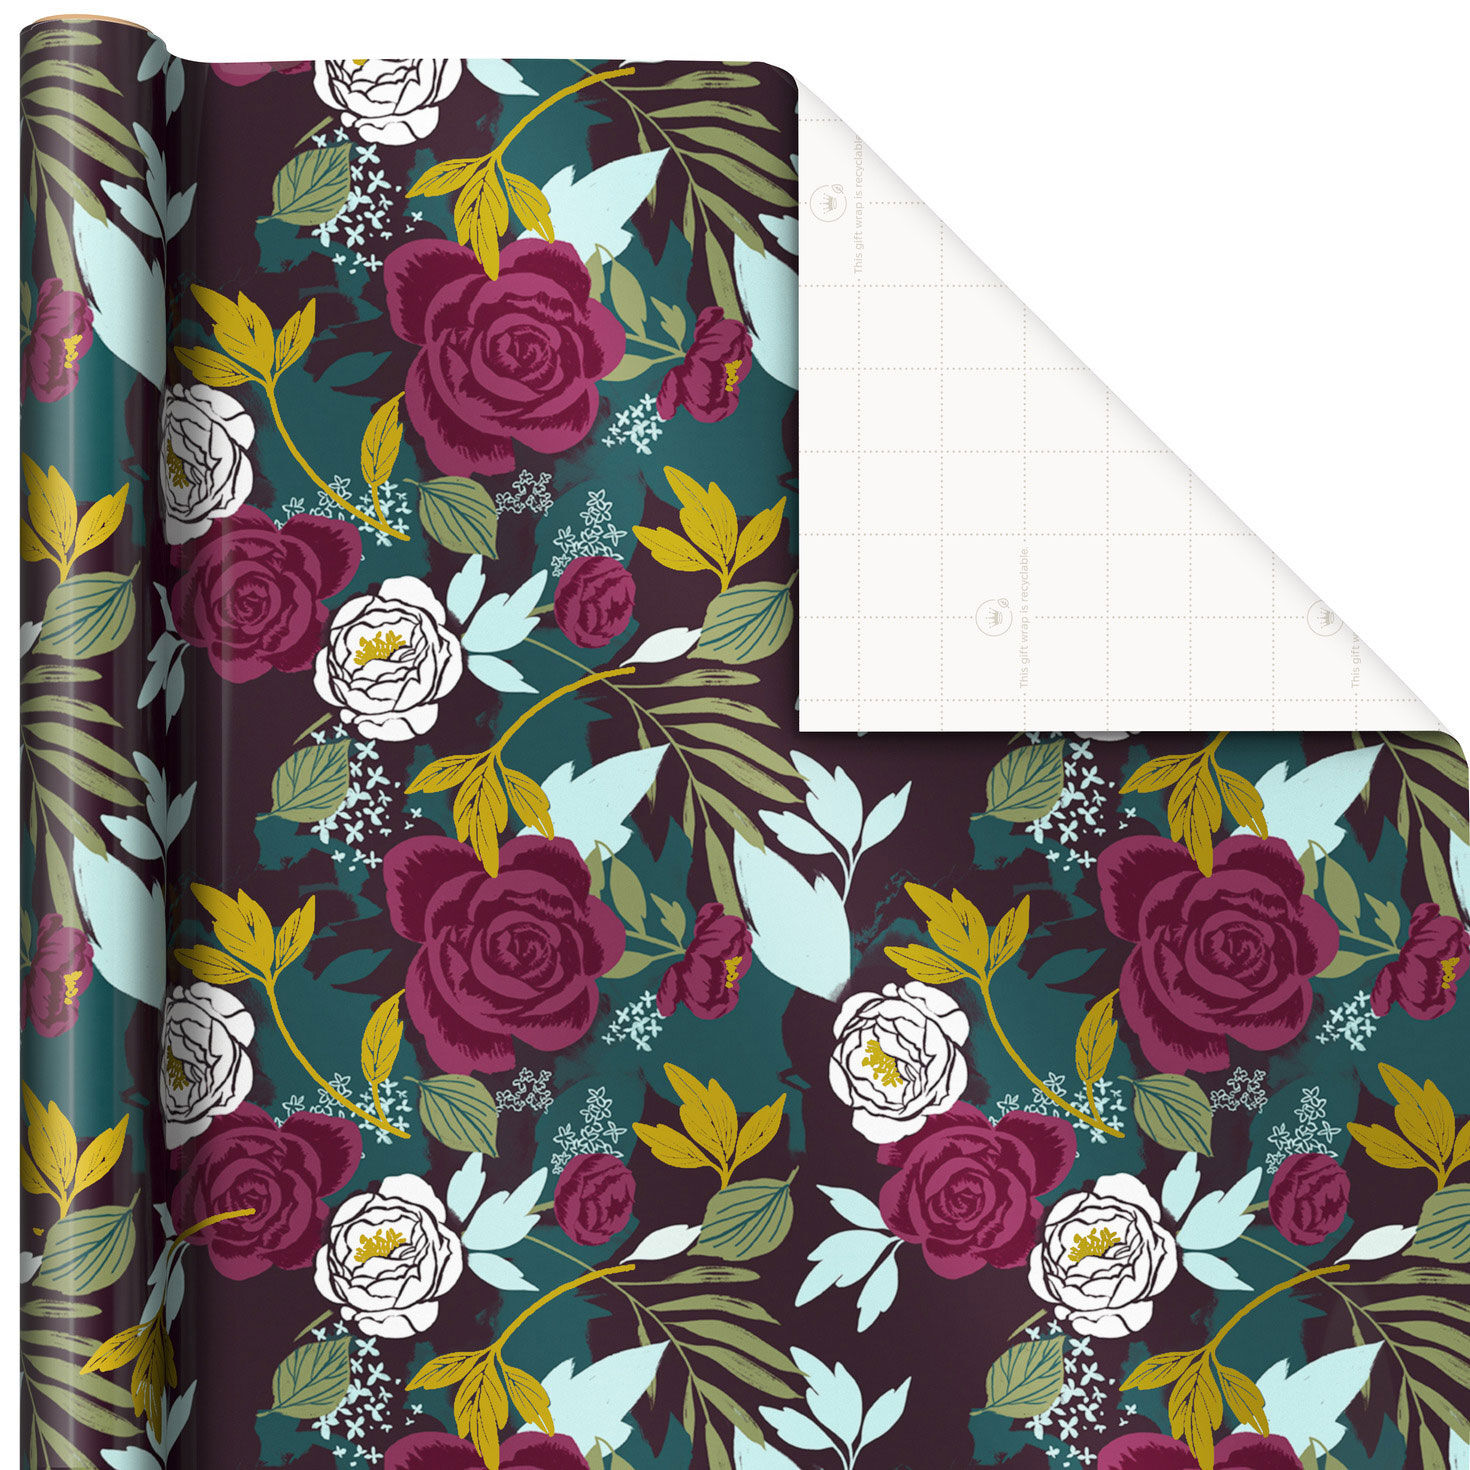 Vintage Hallmark Multi Pack Gift Erap Wrapping Paper Flowers